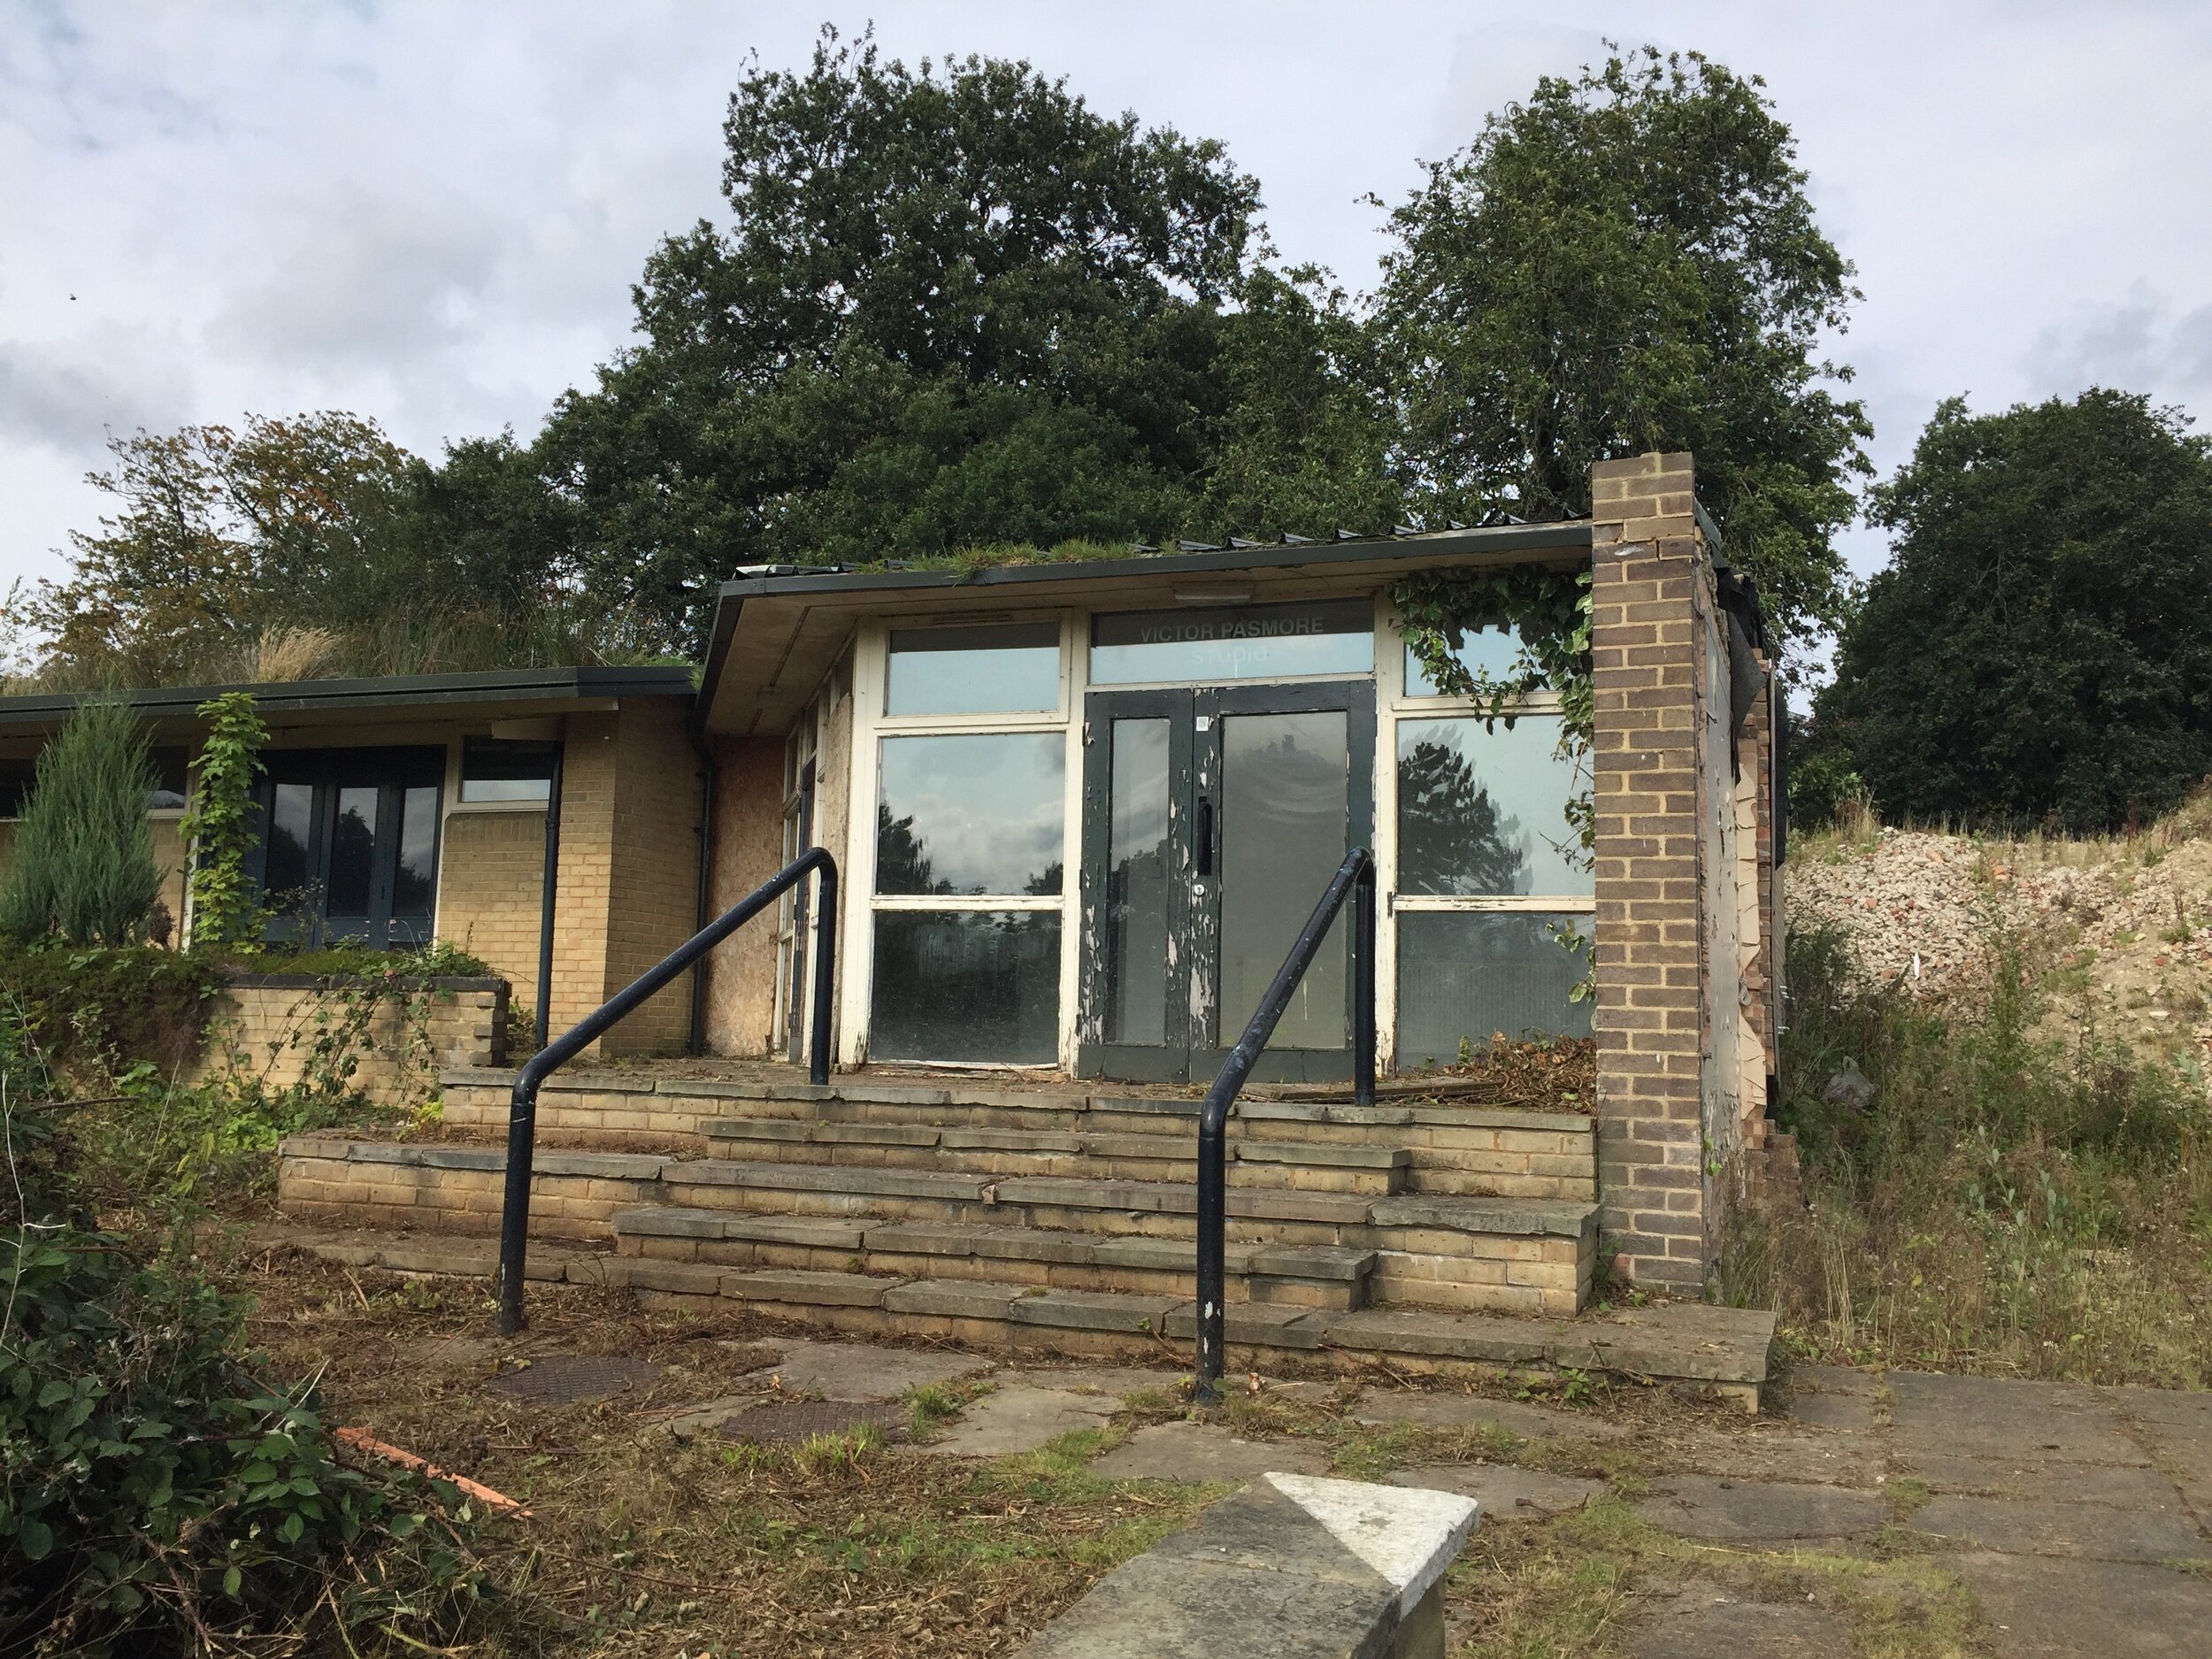  The Victor Pasmore Studio is at the top of the site.  